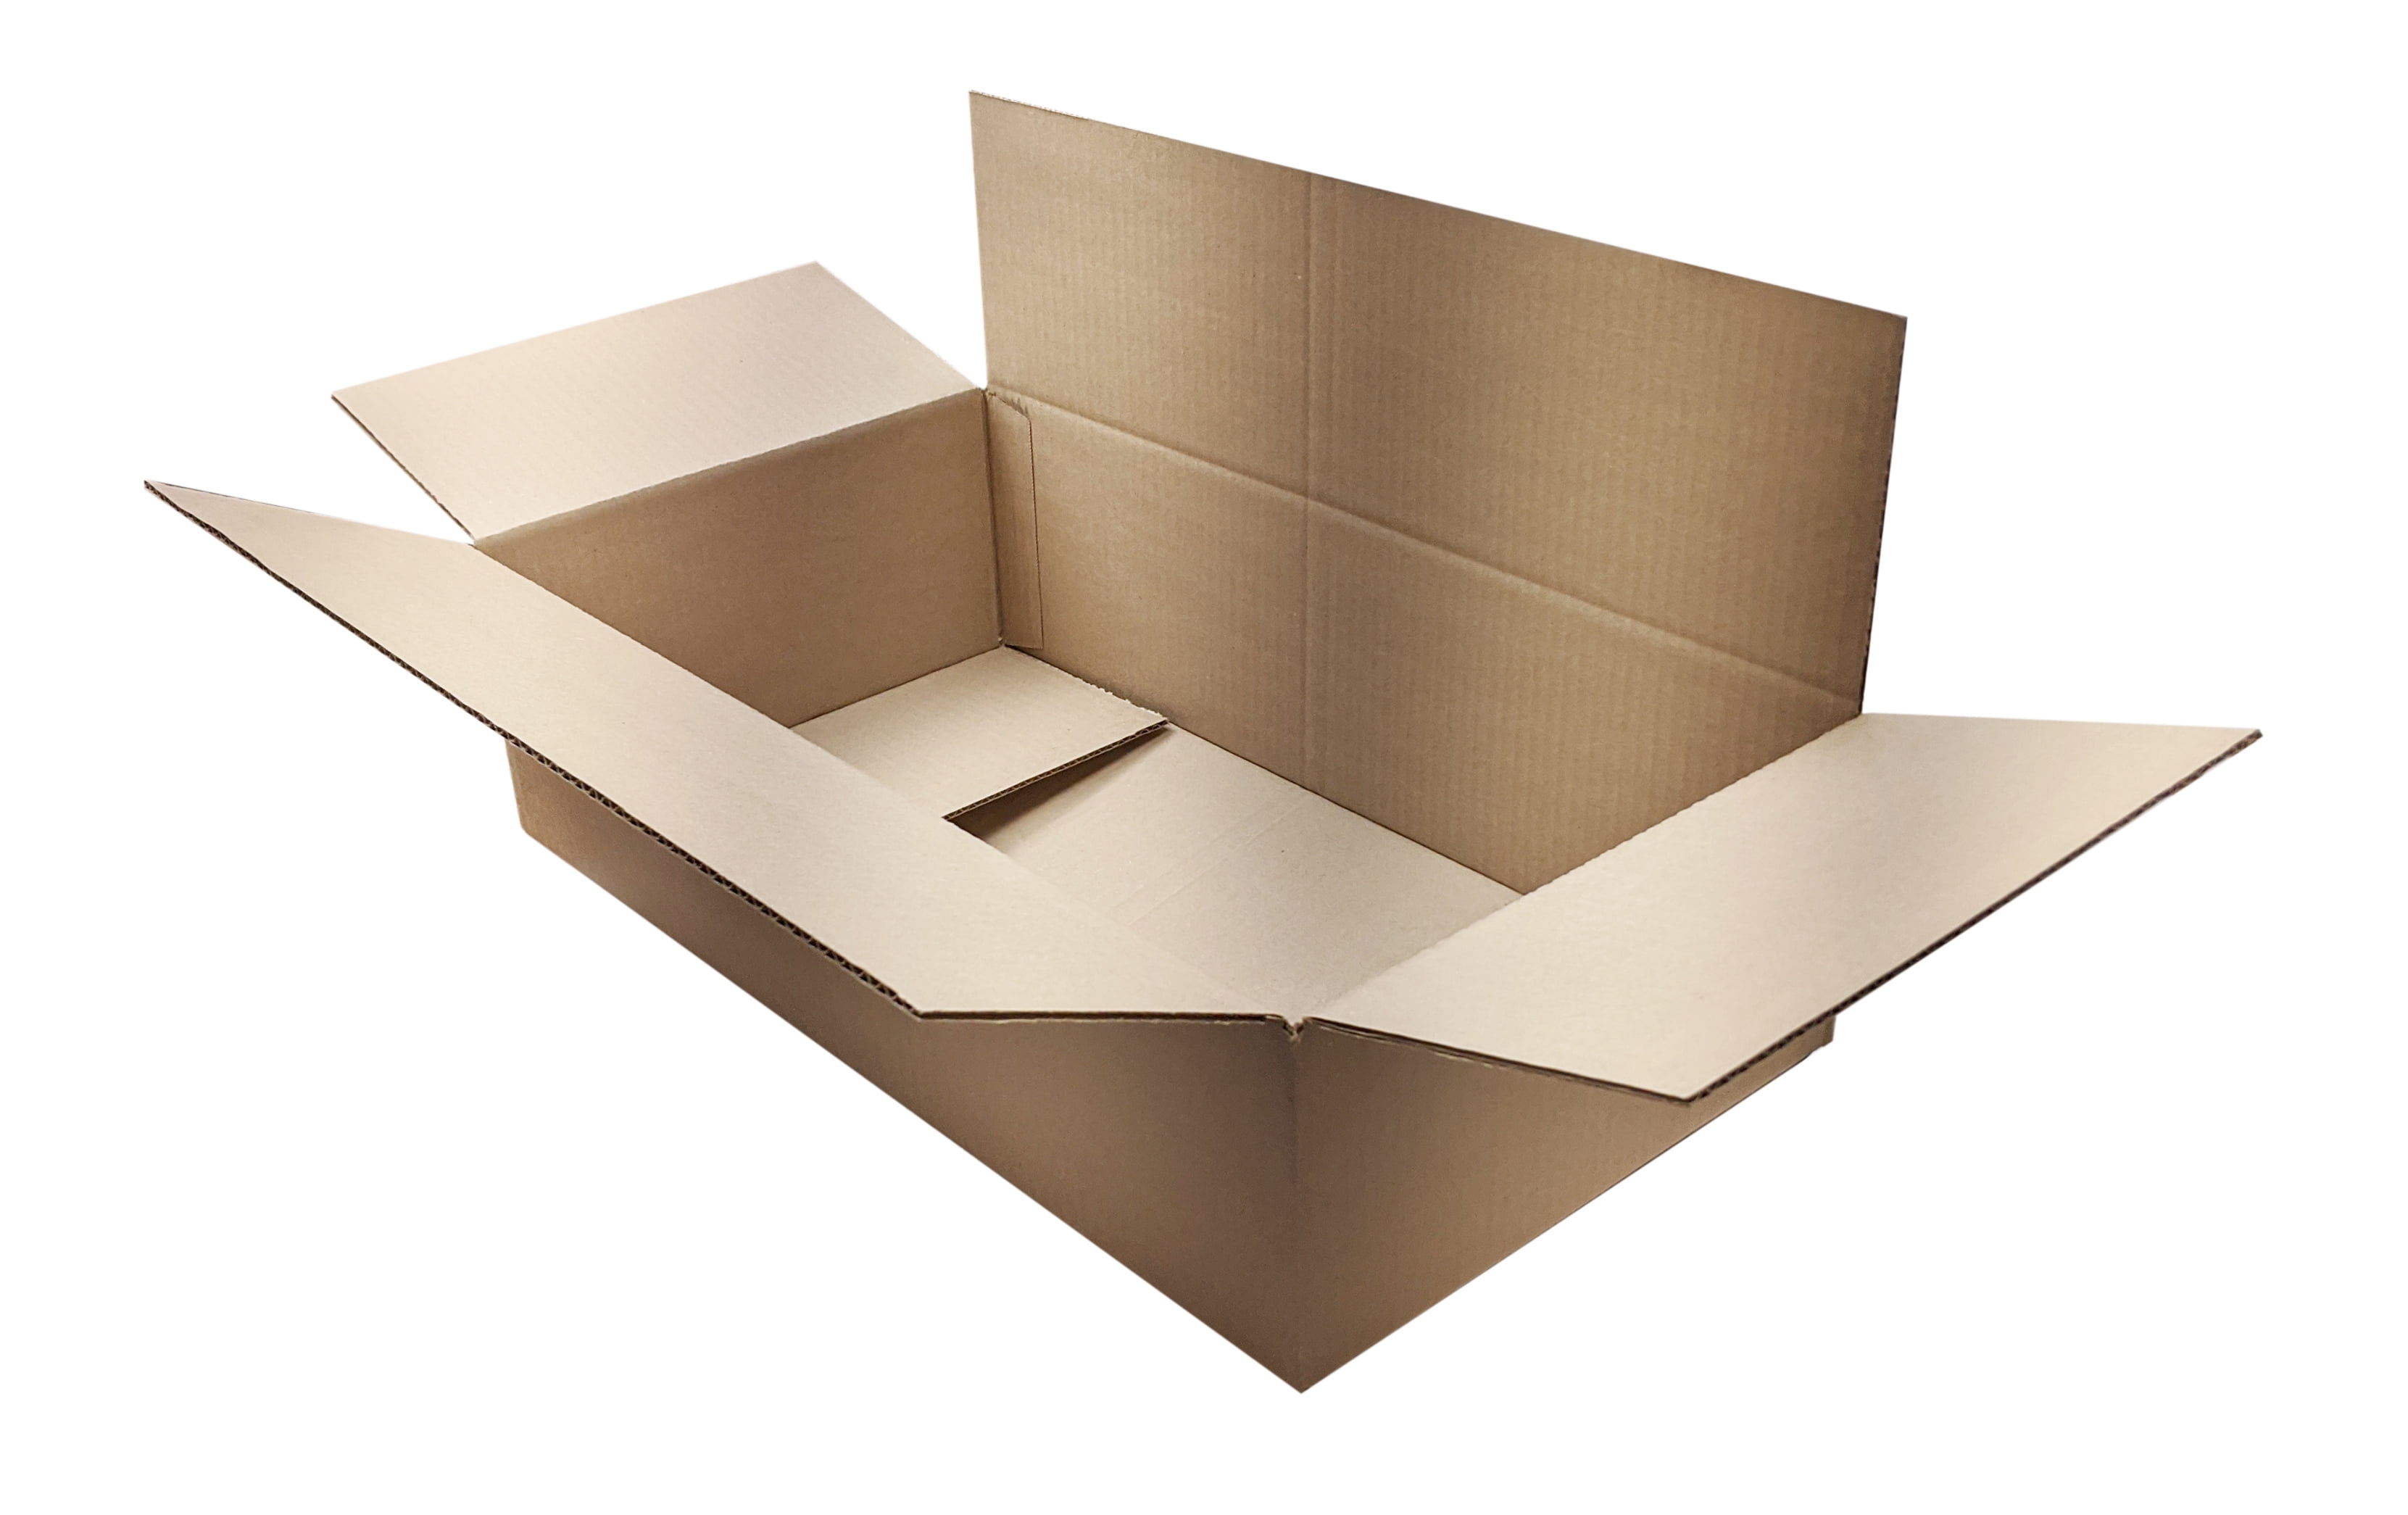 10X10X3 Cardboard Packing Mailing Shipping Corrugated Box Cartons Moving